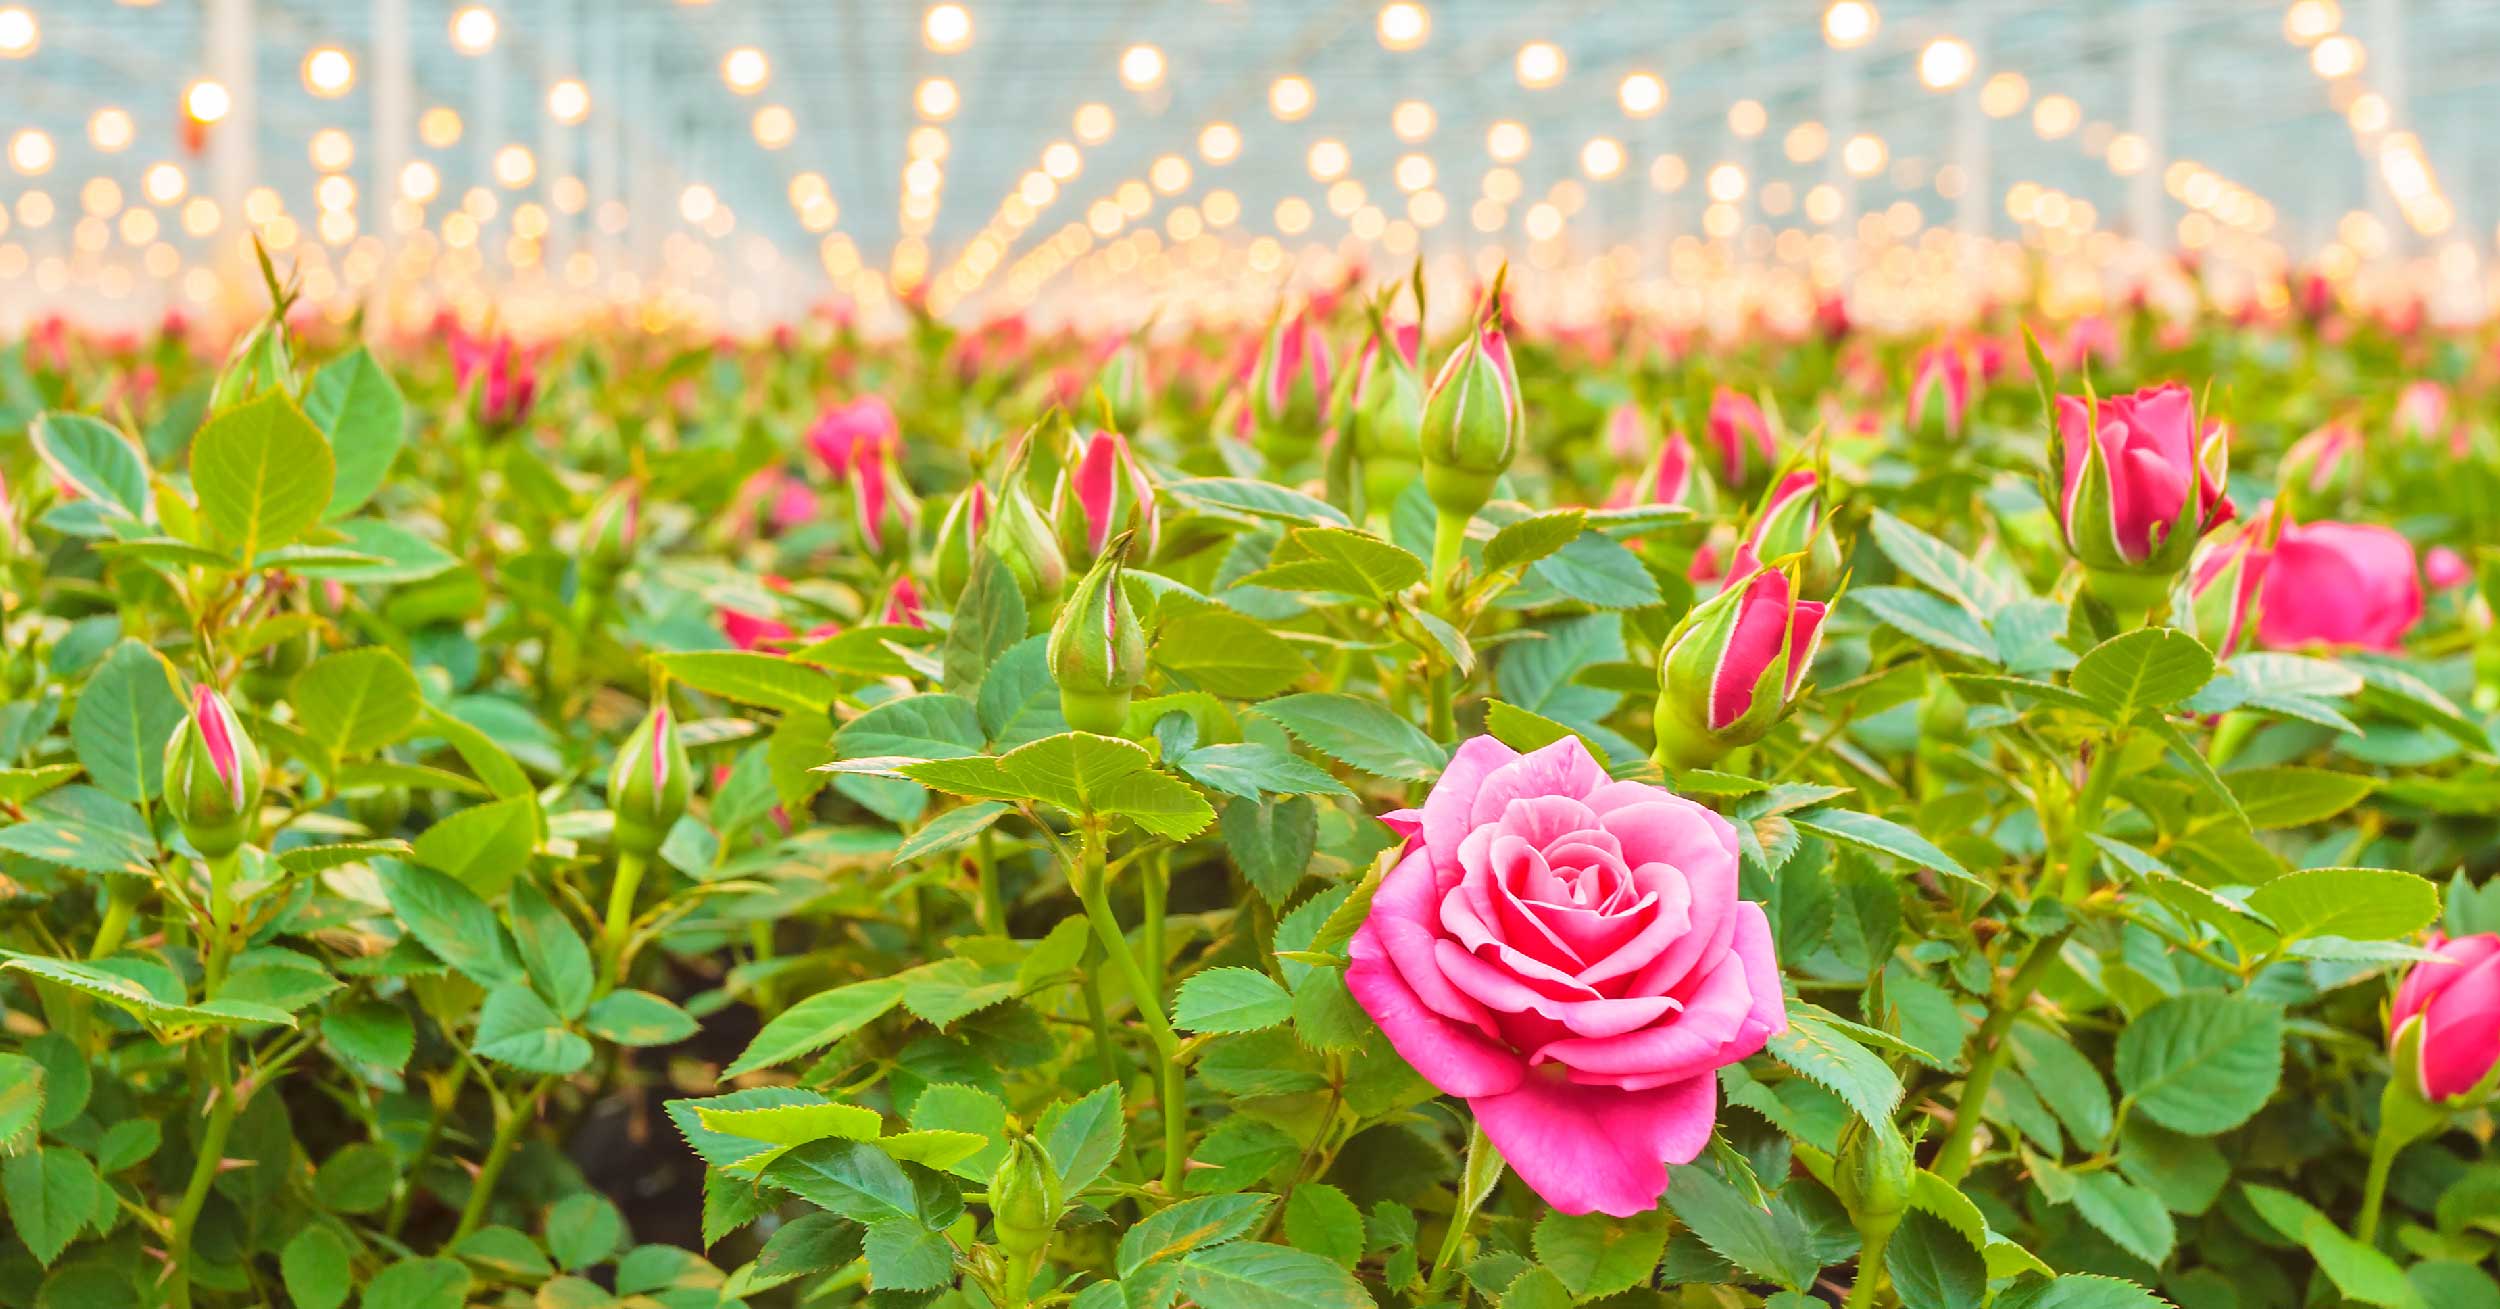 Field of roses in a greenhouse with bright lights that can cause power quality issues like harmonic distortion.